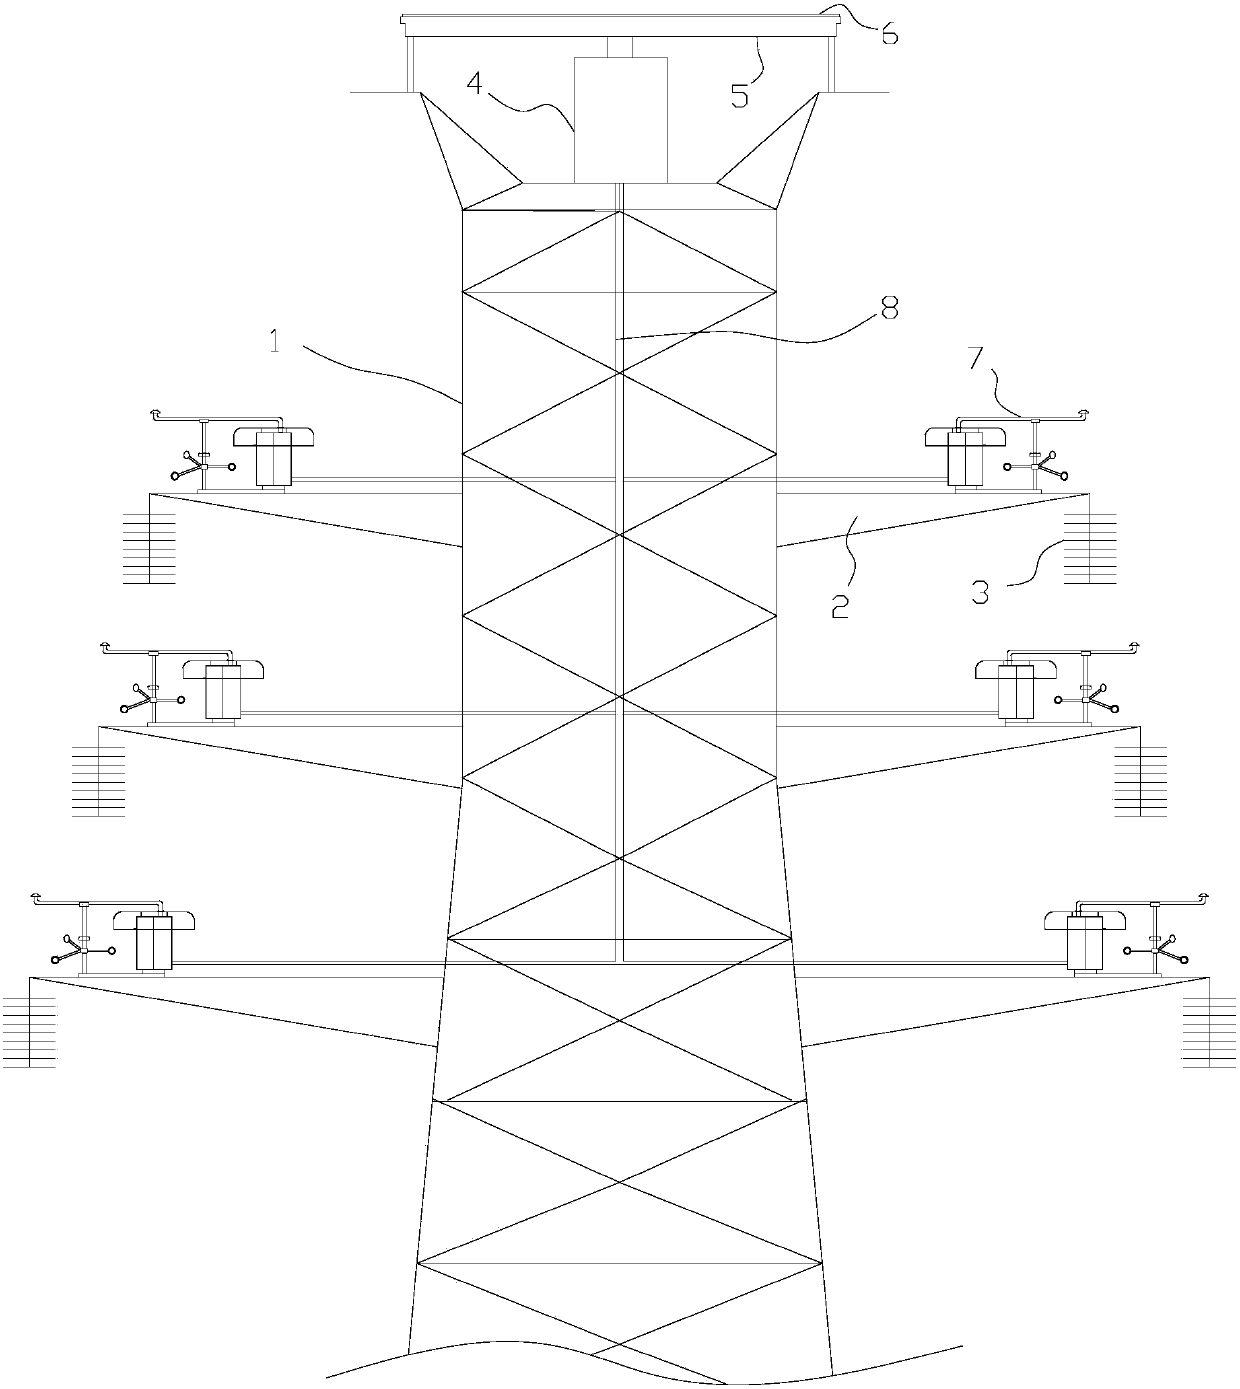 A transmission tower for power transmission